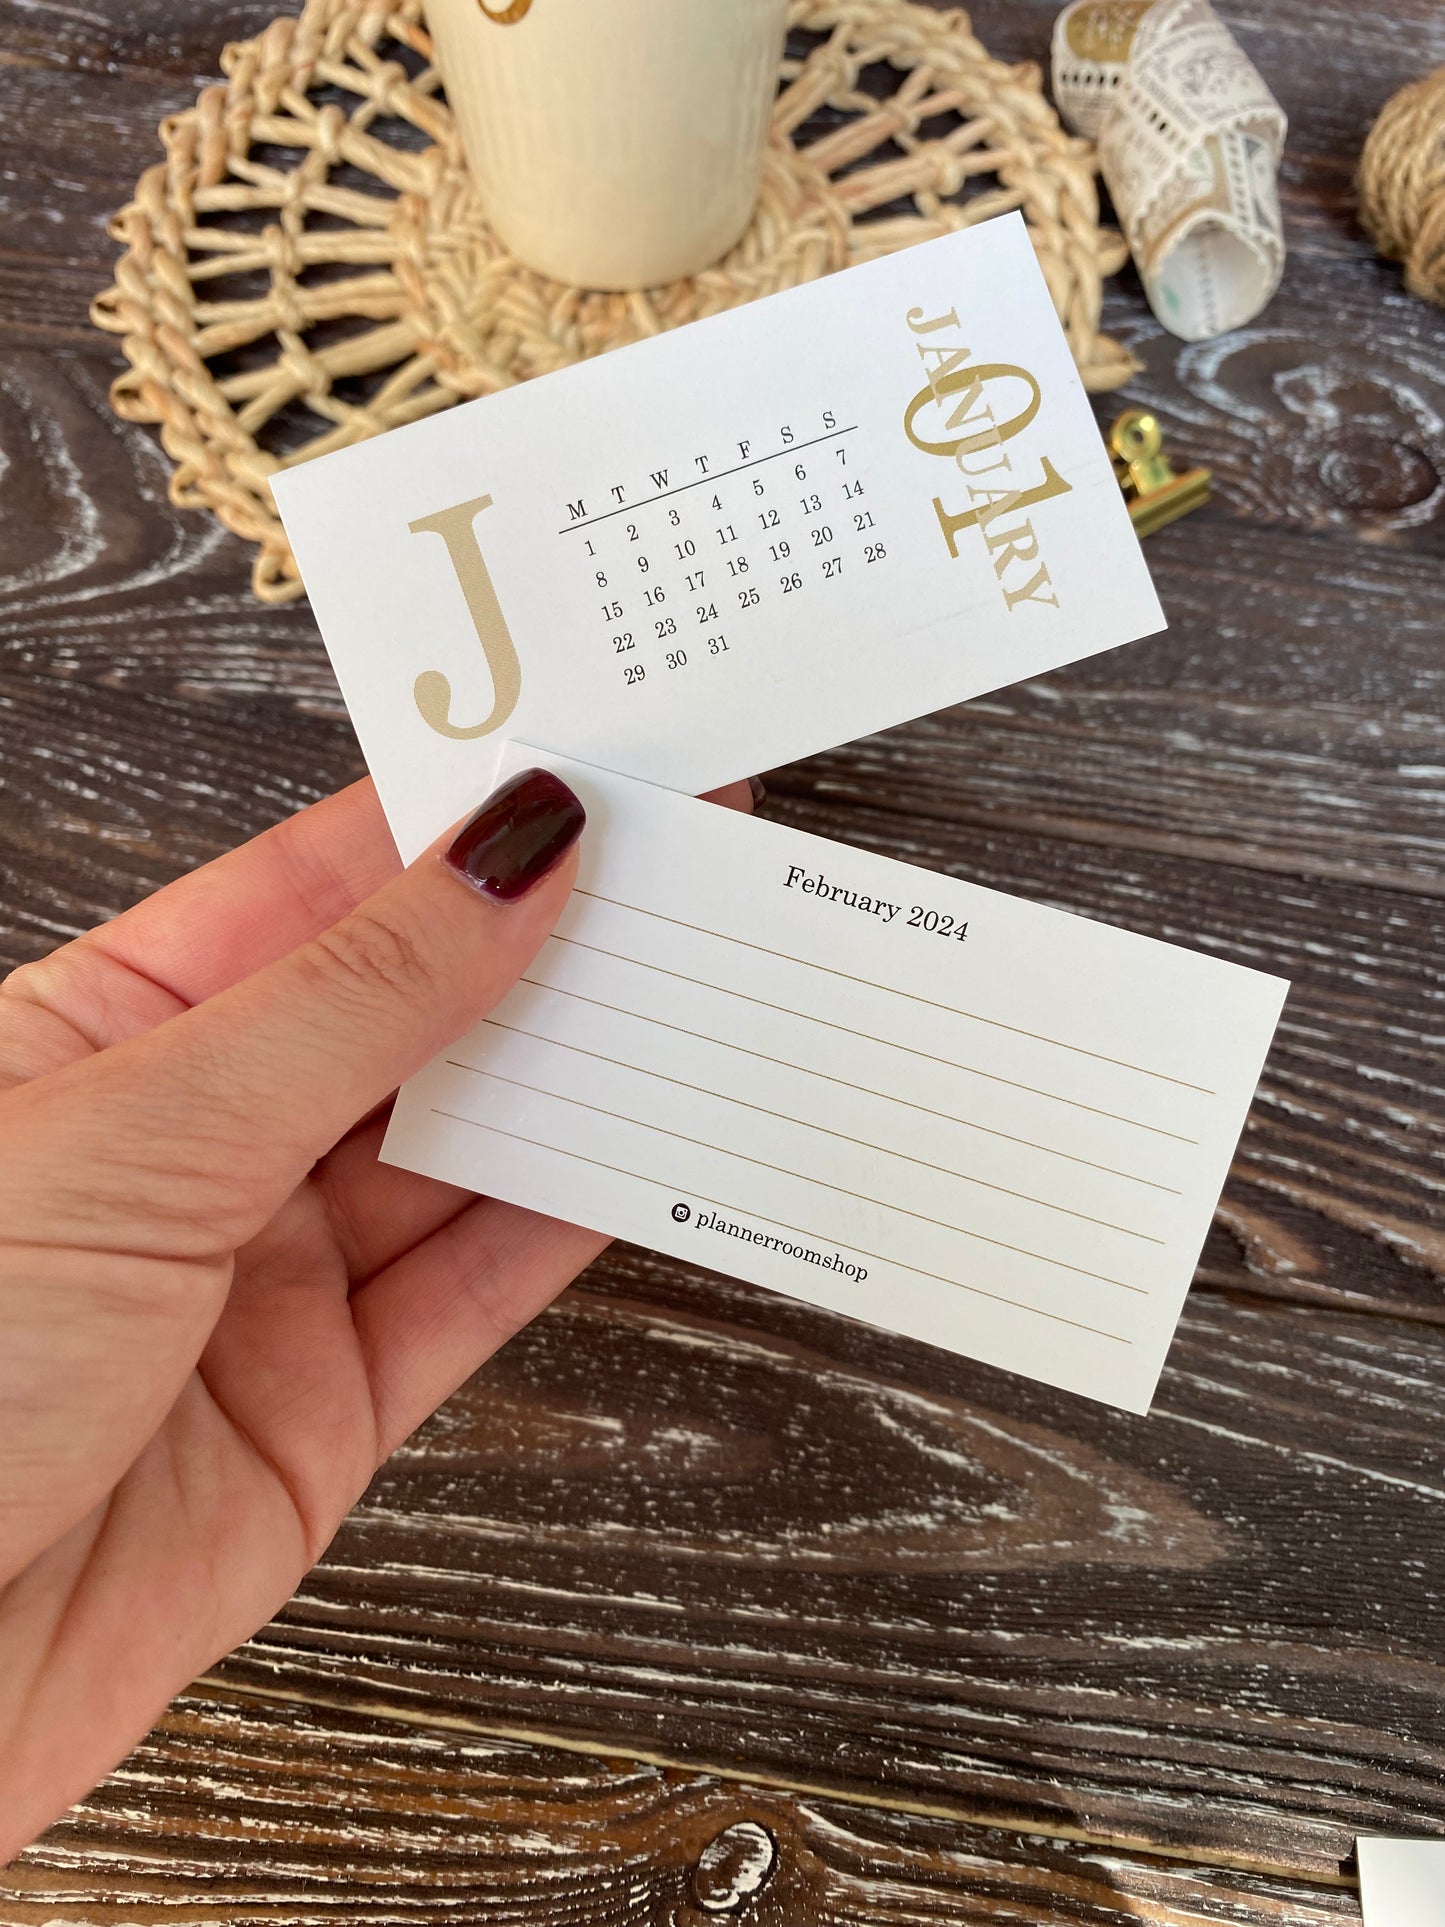 2024 DATED monthly planner cards